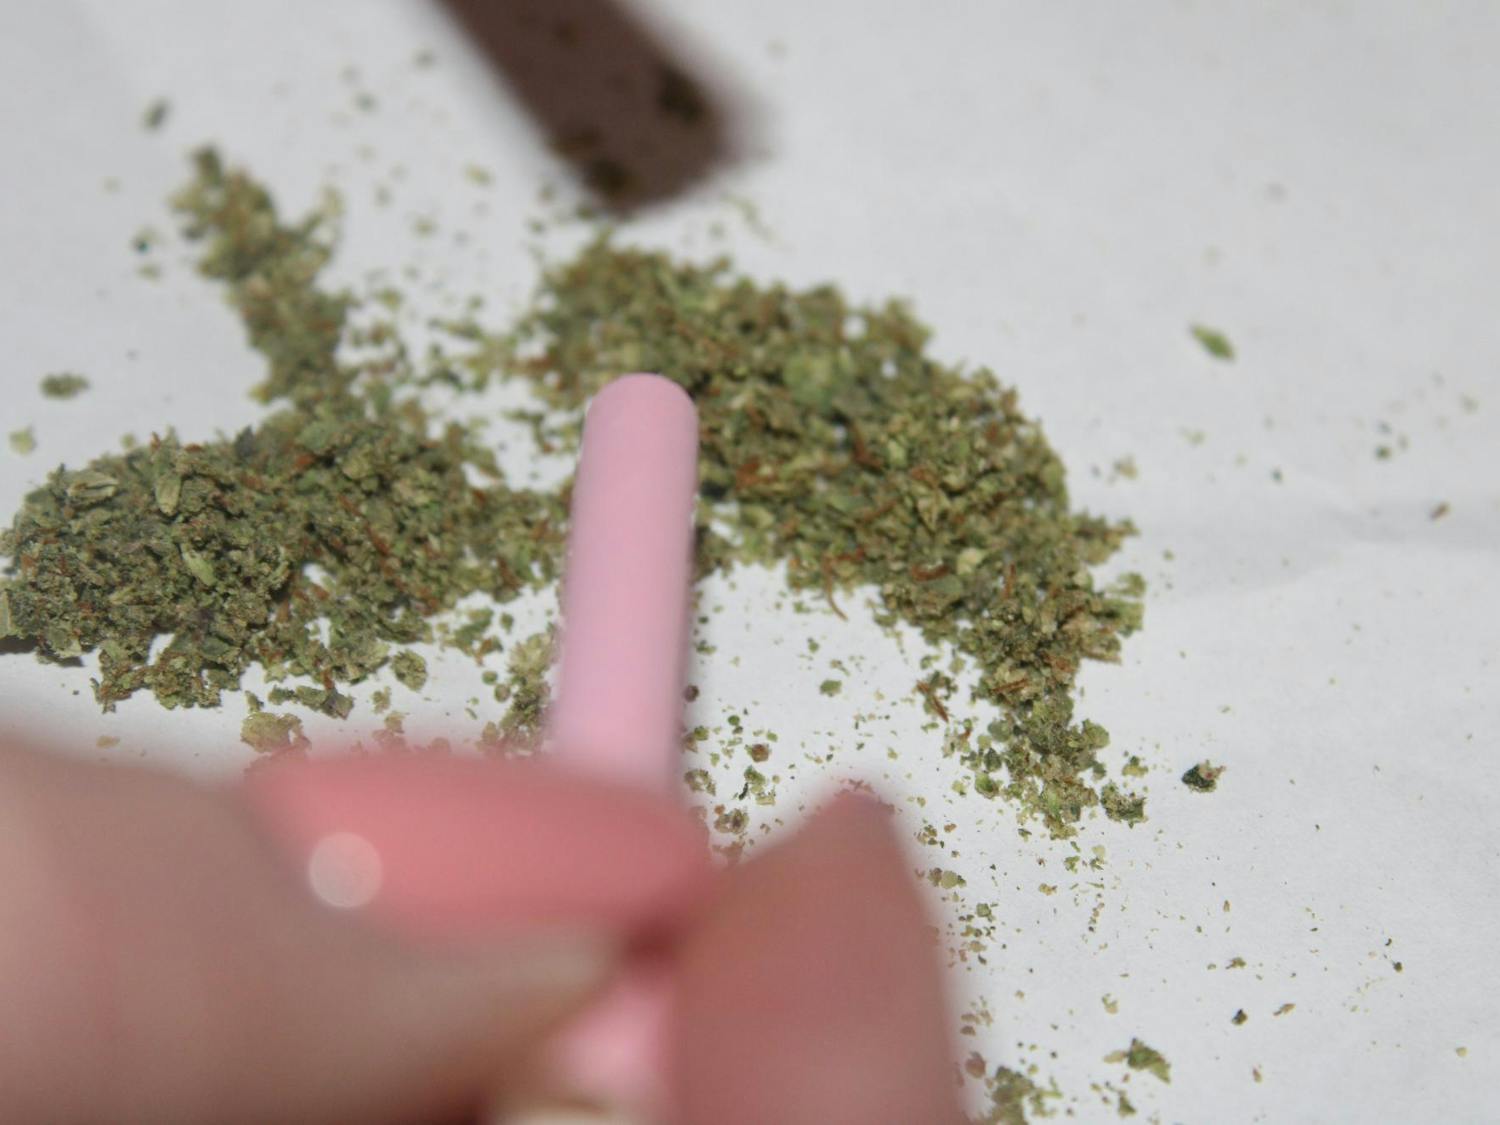 Marijuana being packed into a joint on an ashtray.